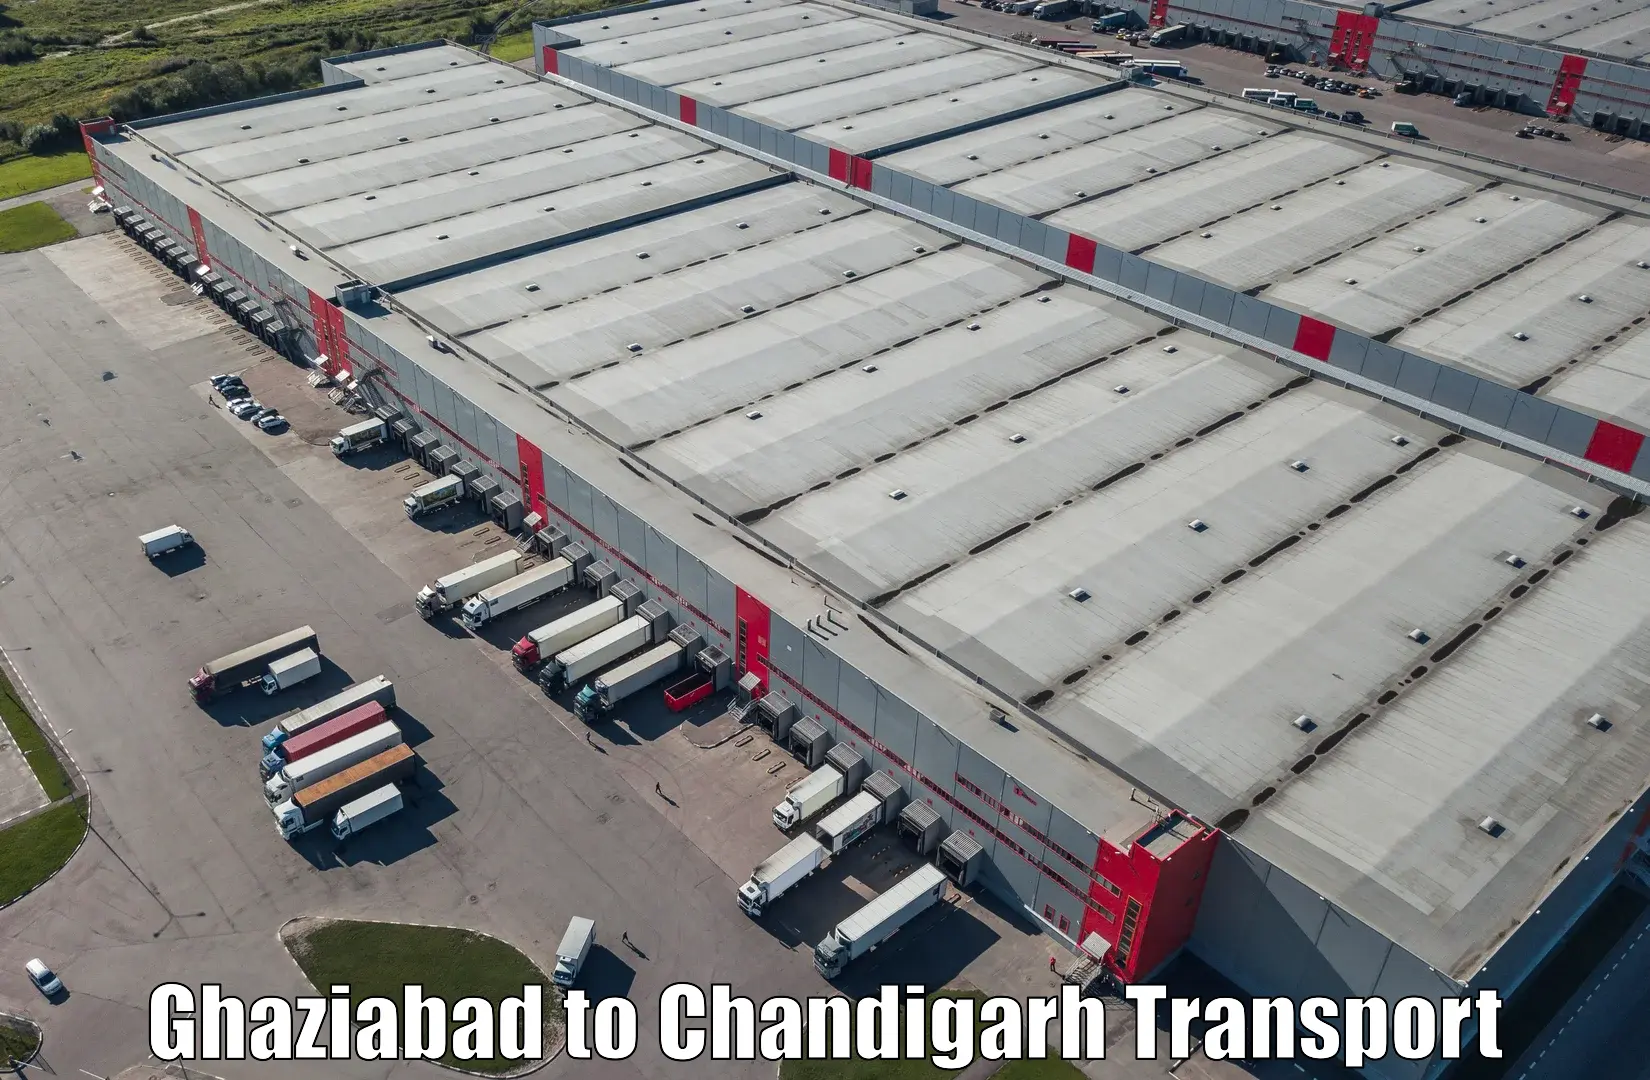 Express transport services Ghaziabad to Chandigarh